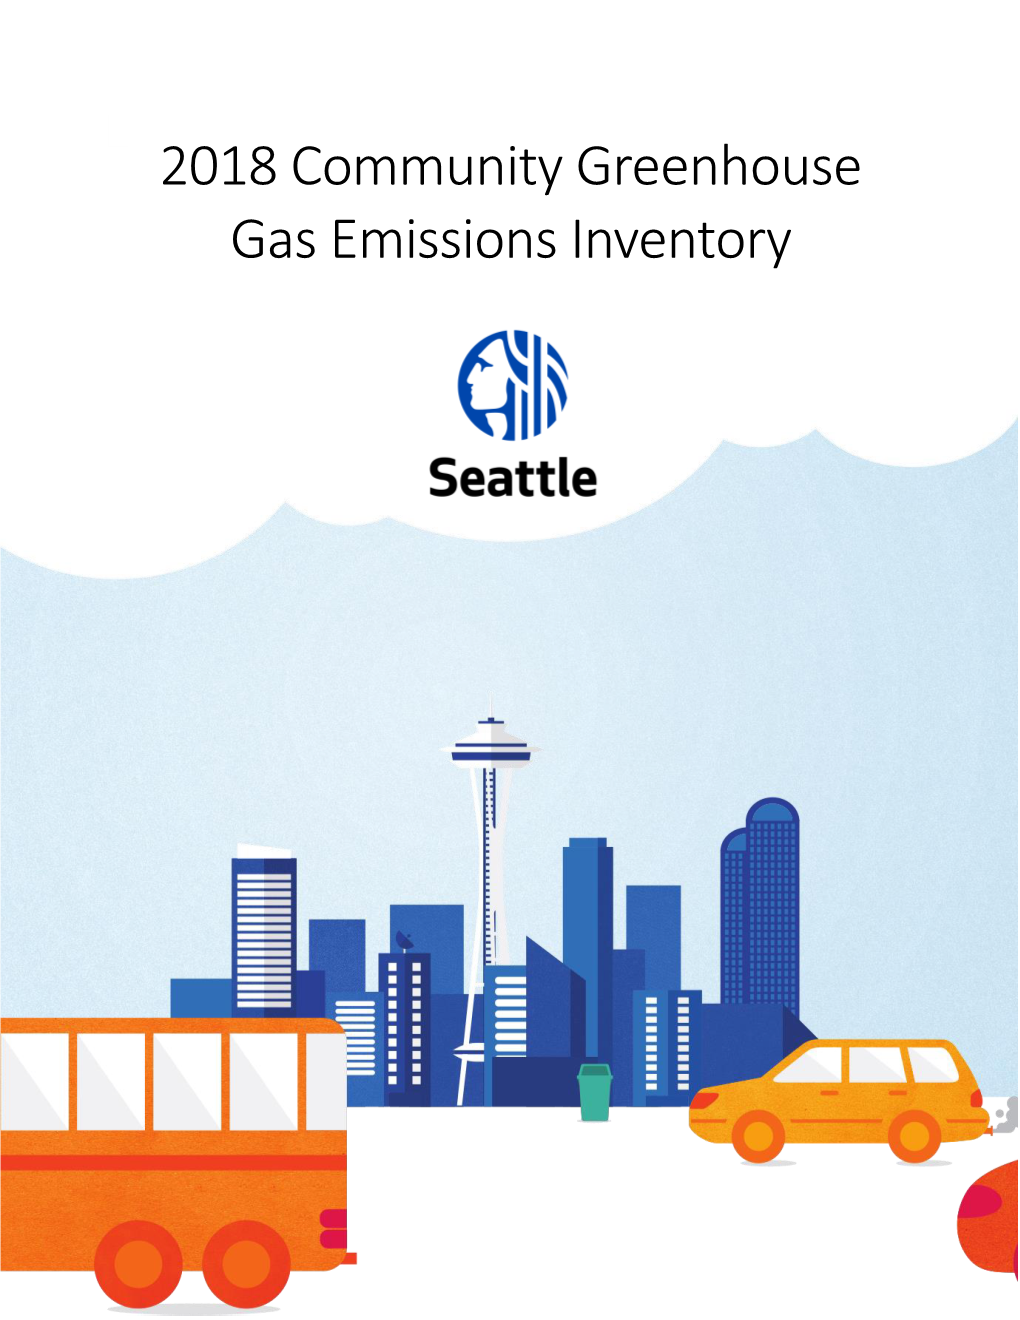 2018 Community Greenhouse Gas Emissions Inventory